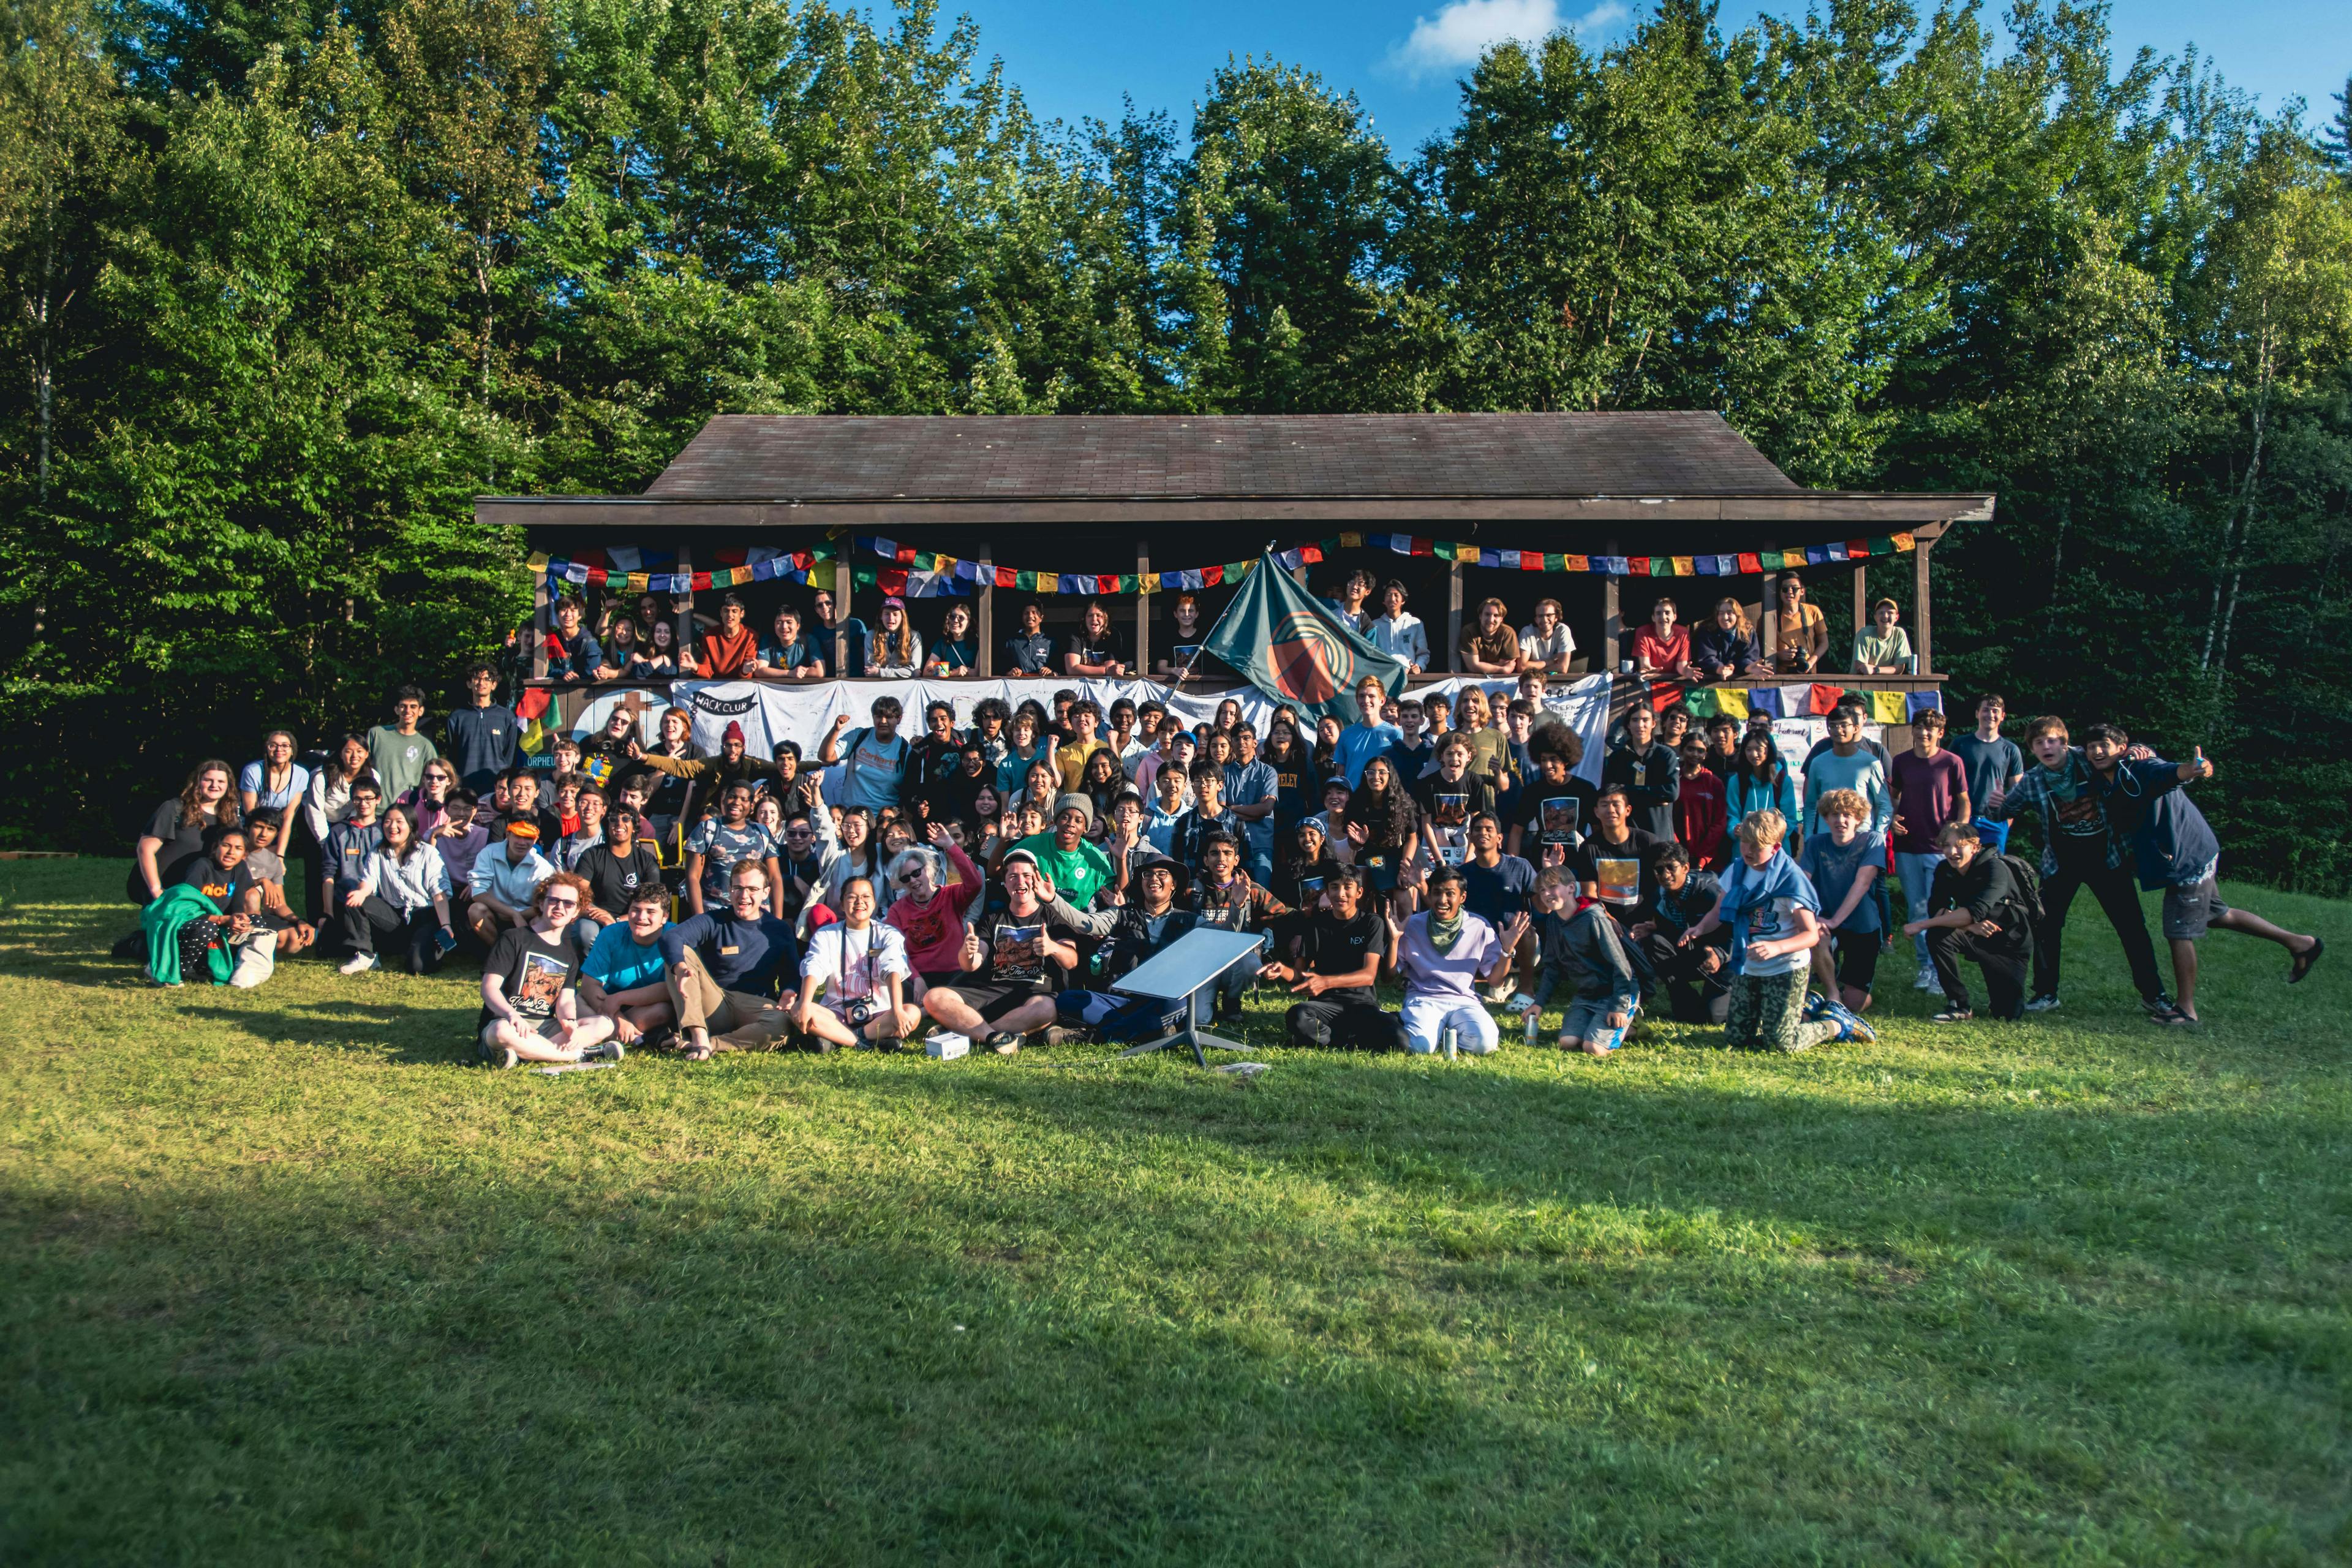 Hack Clubbers gather in the great outdoors of Cabot, VT, for an experience unlike any other: Outernet. 📸 Photo by Matt Gleich, Hack Clubber in NH!